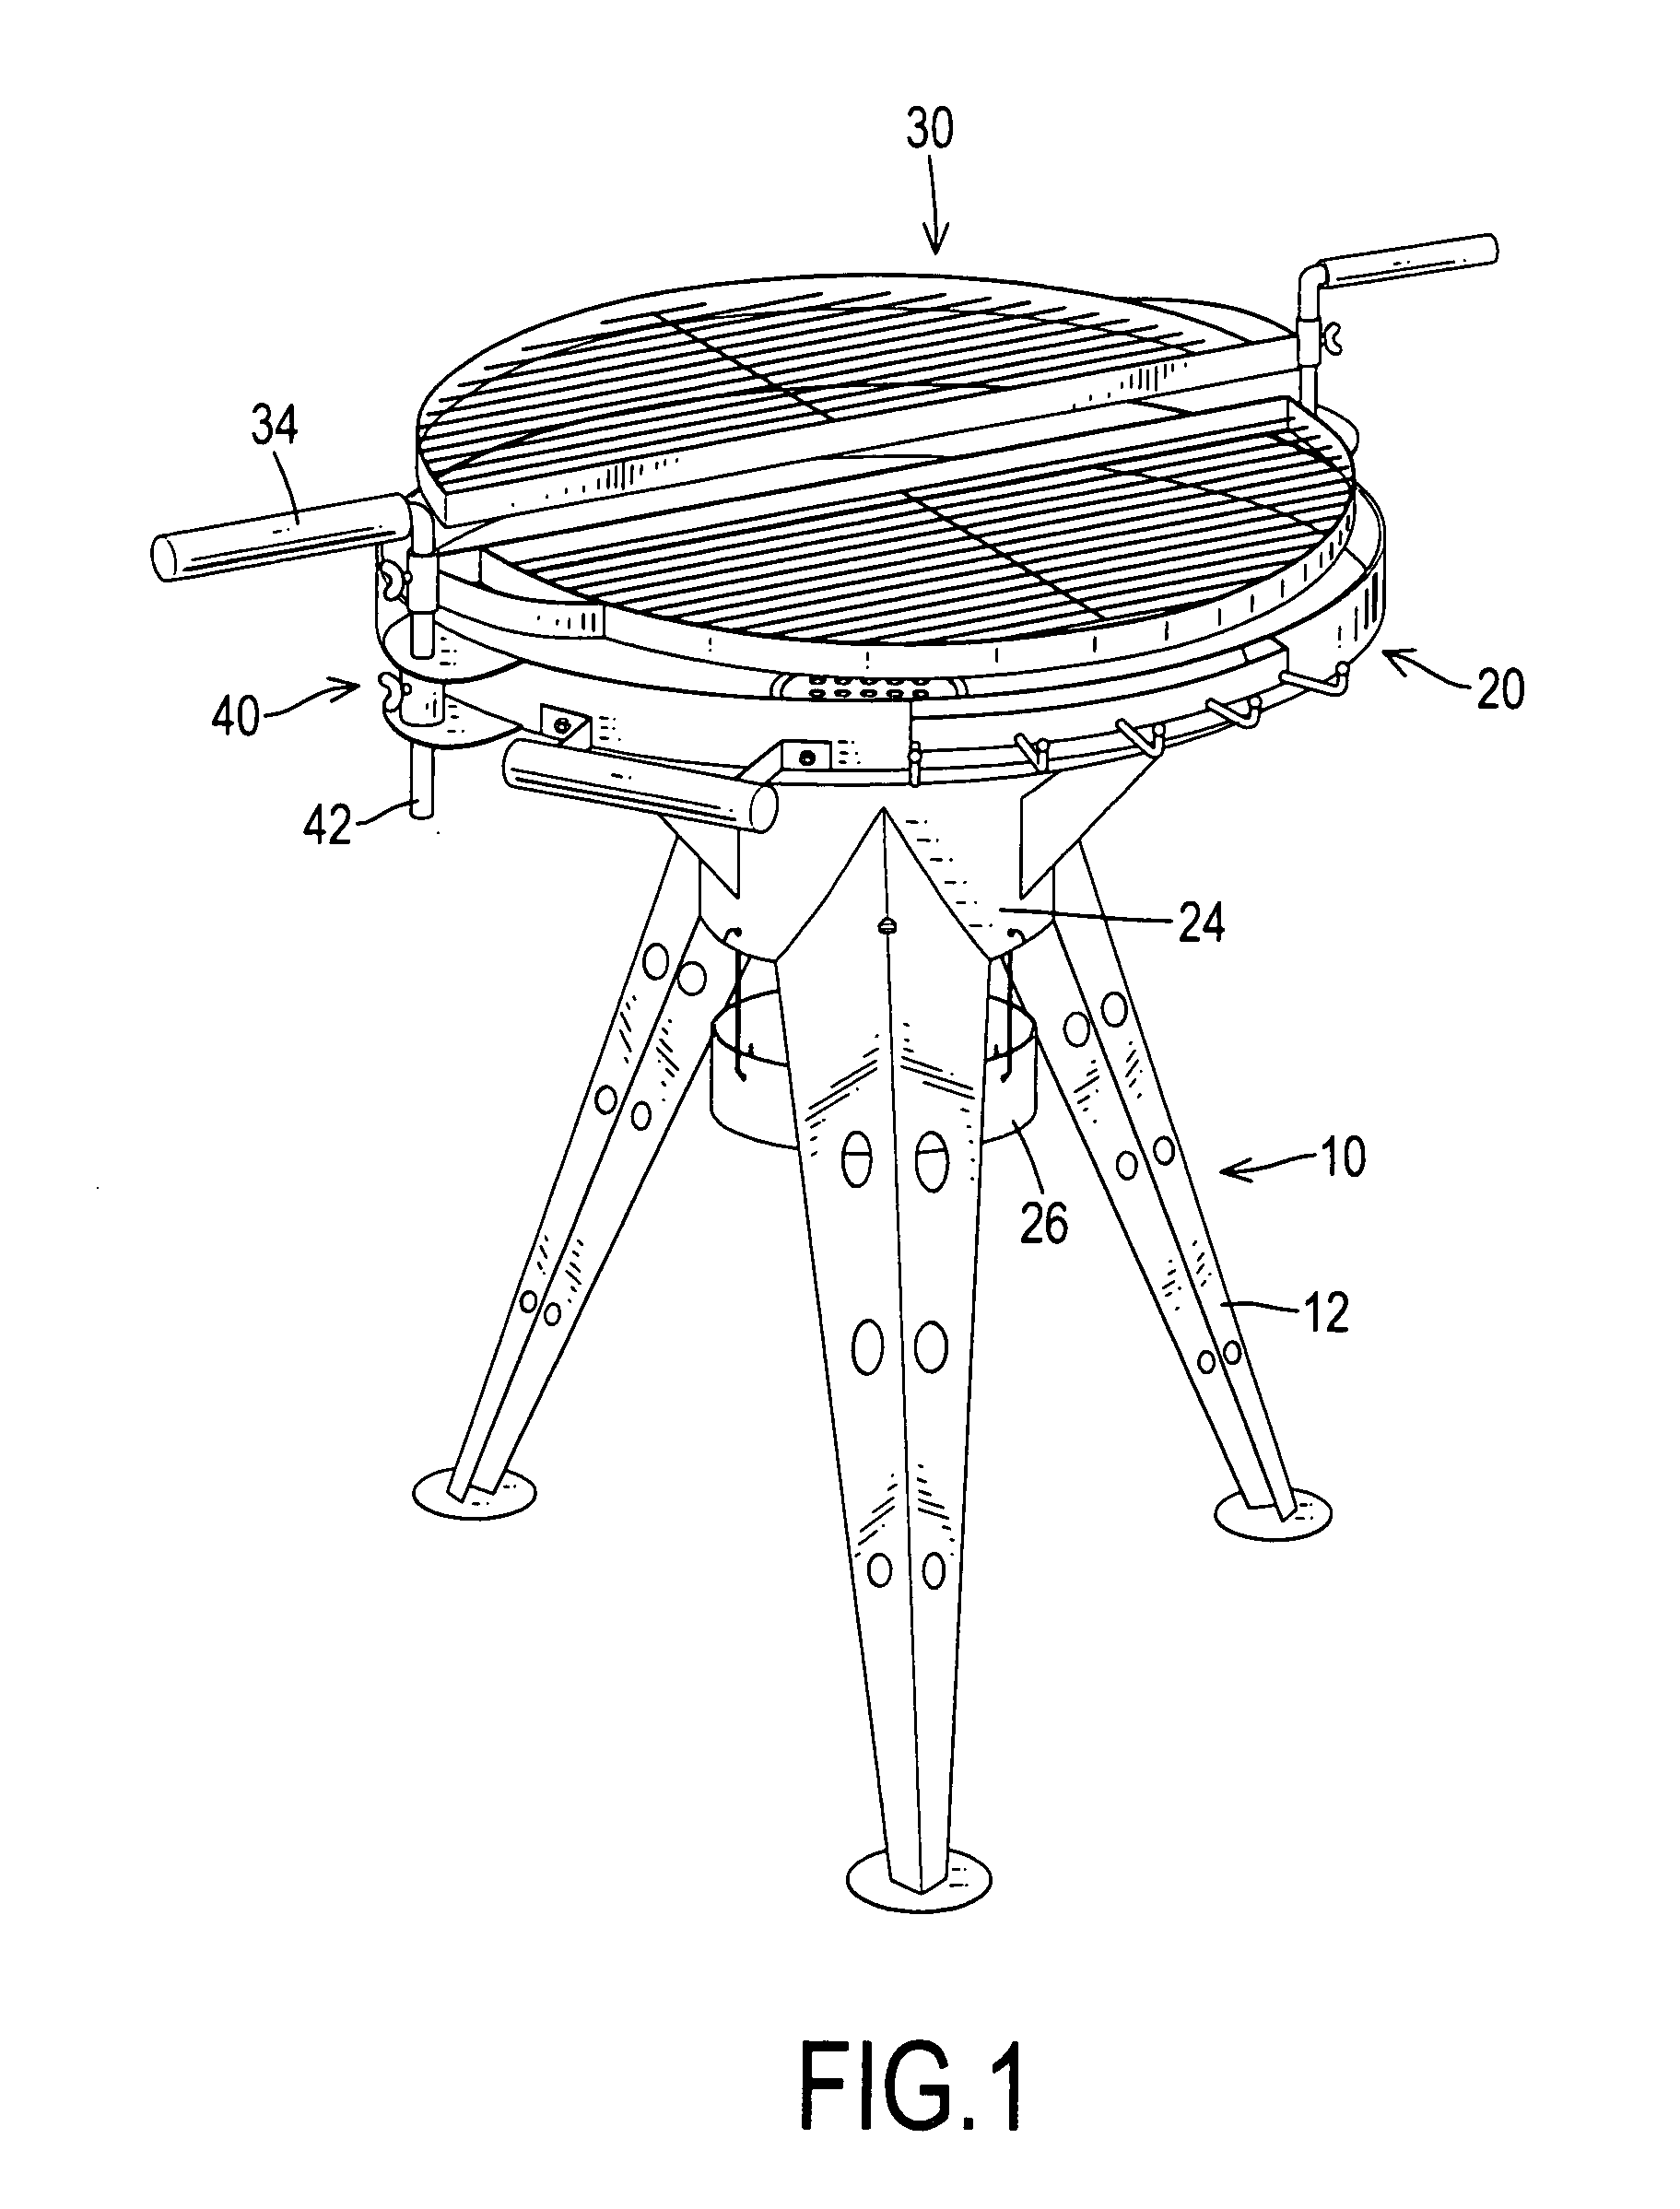 Barbecue grill with multiple adjustable grids